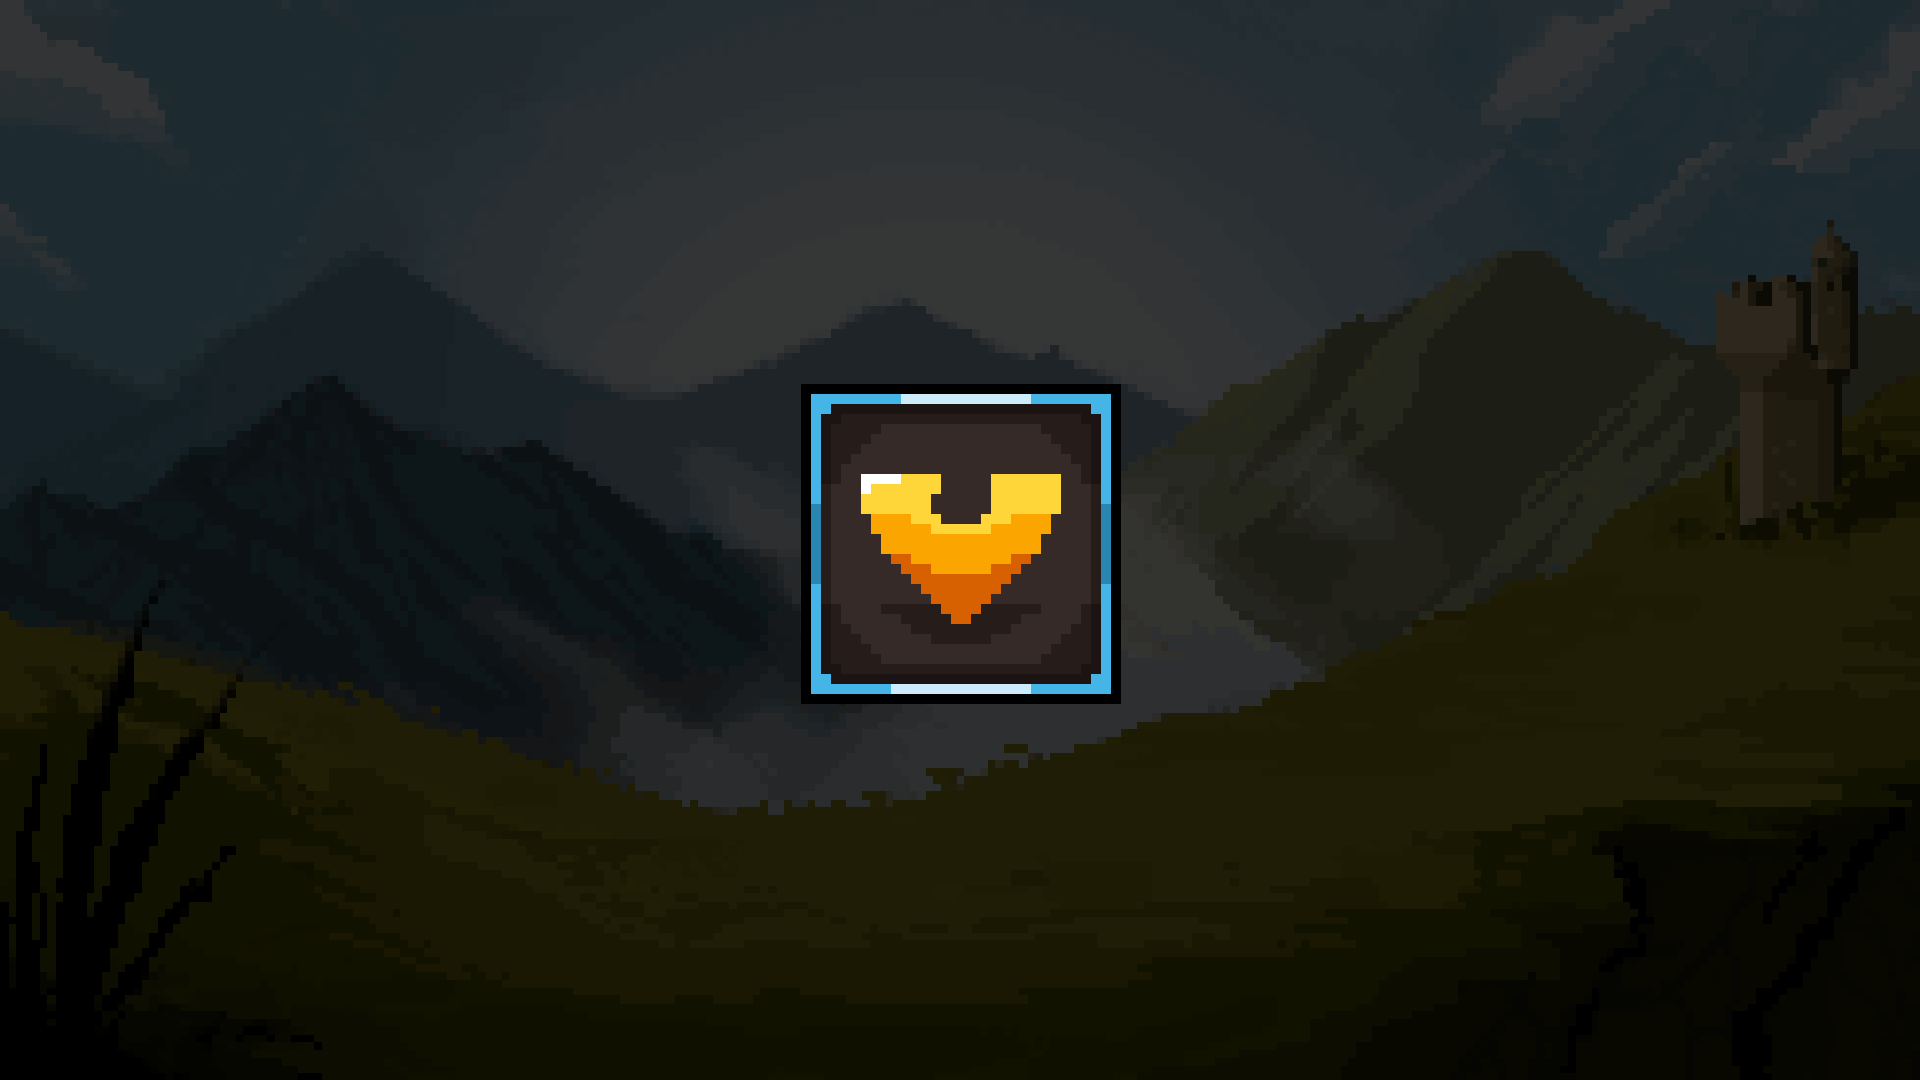 Icon for Victory!